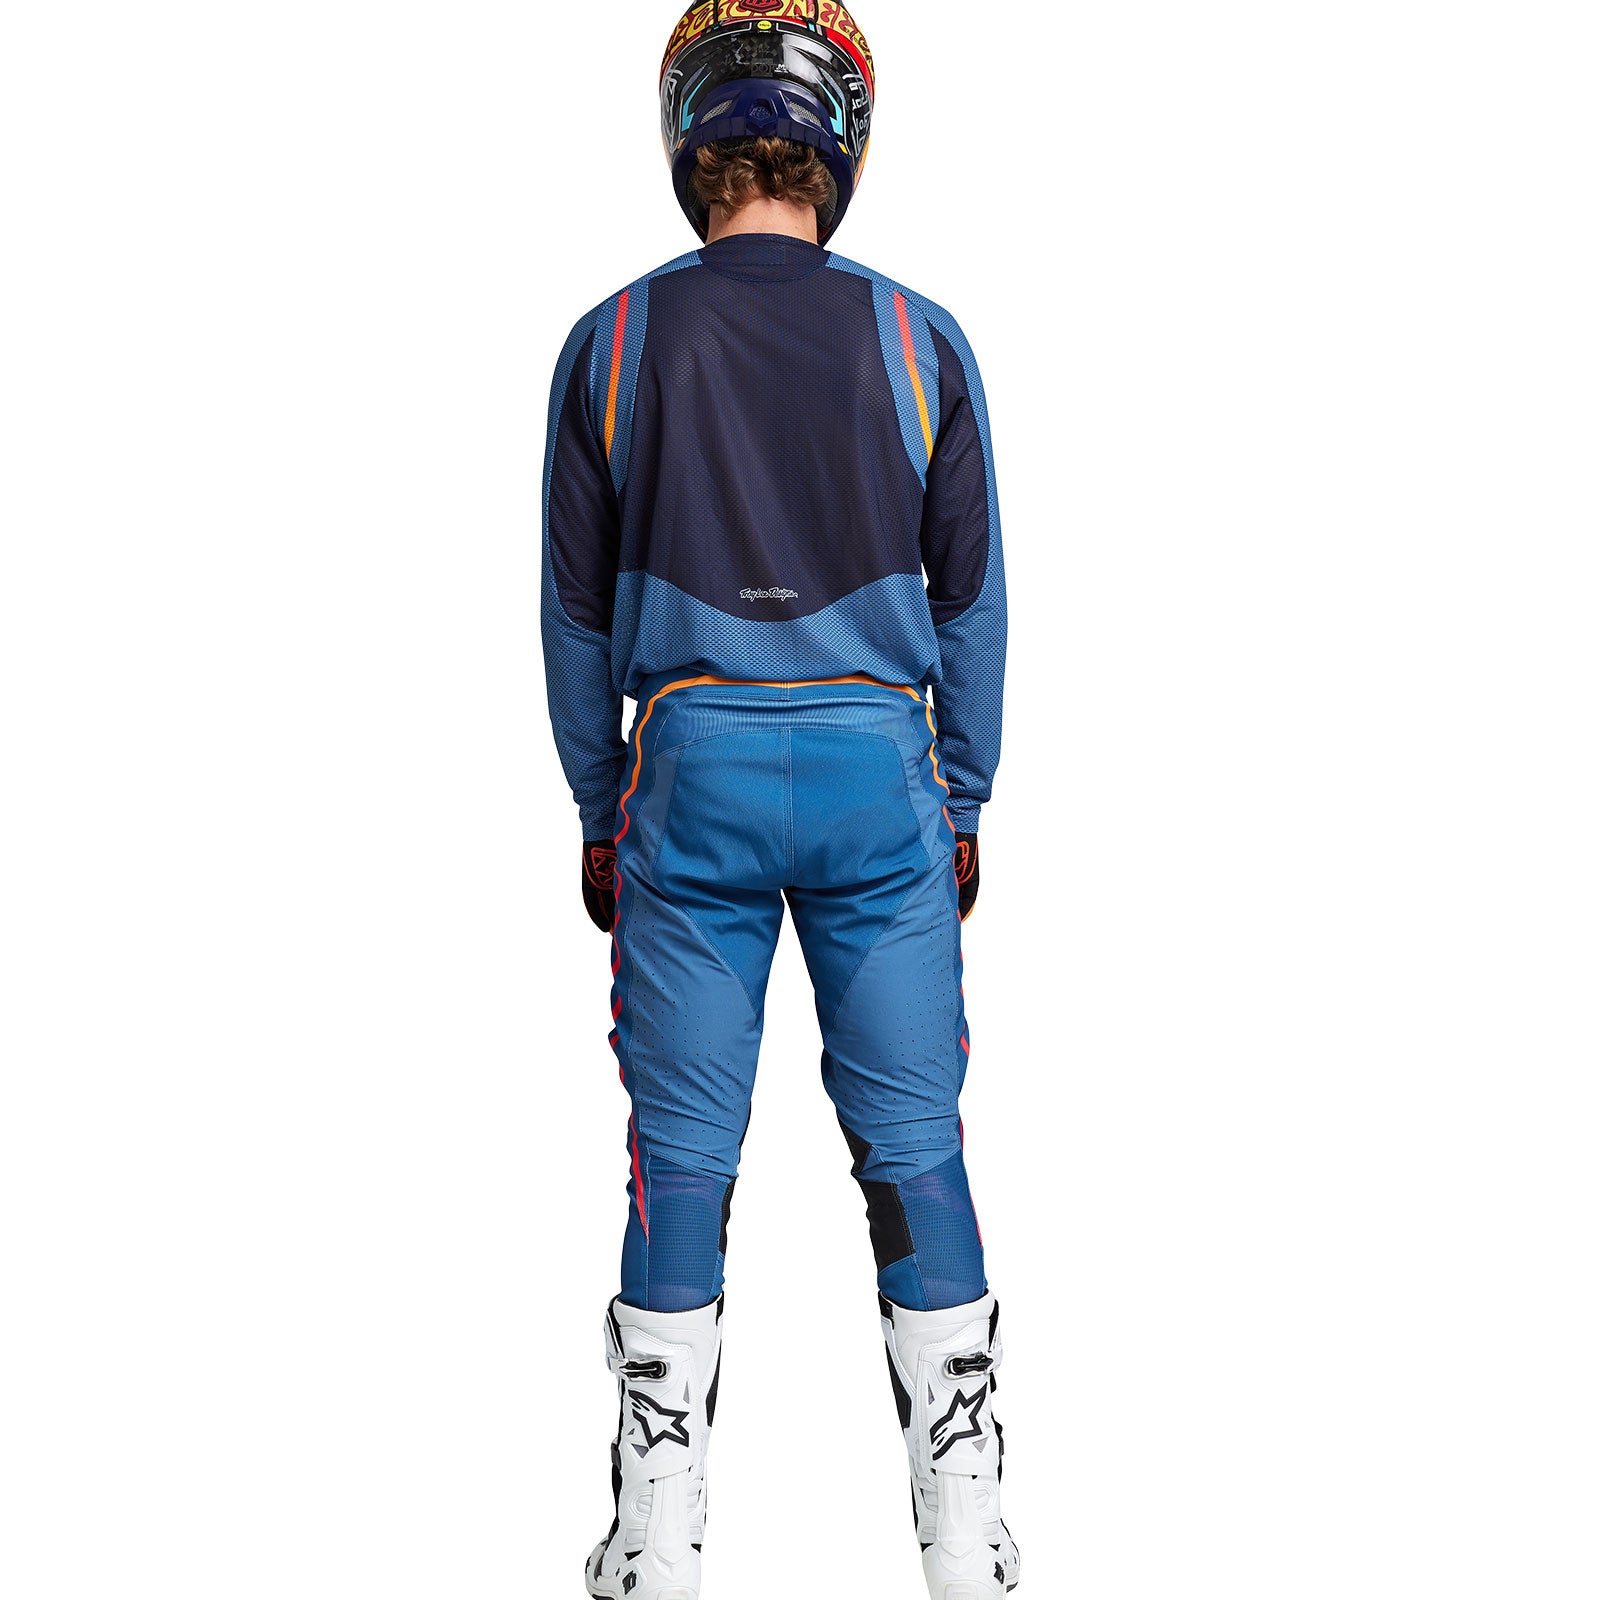 SE Pro Air Jersey Pinned Blue – Troy Lee Designs